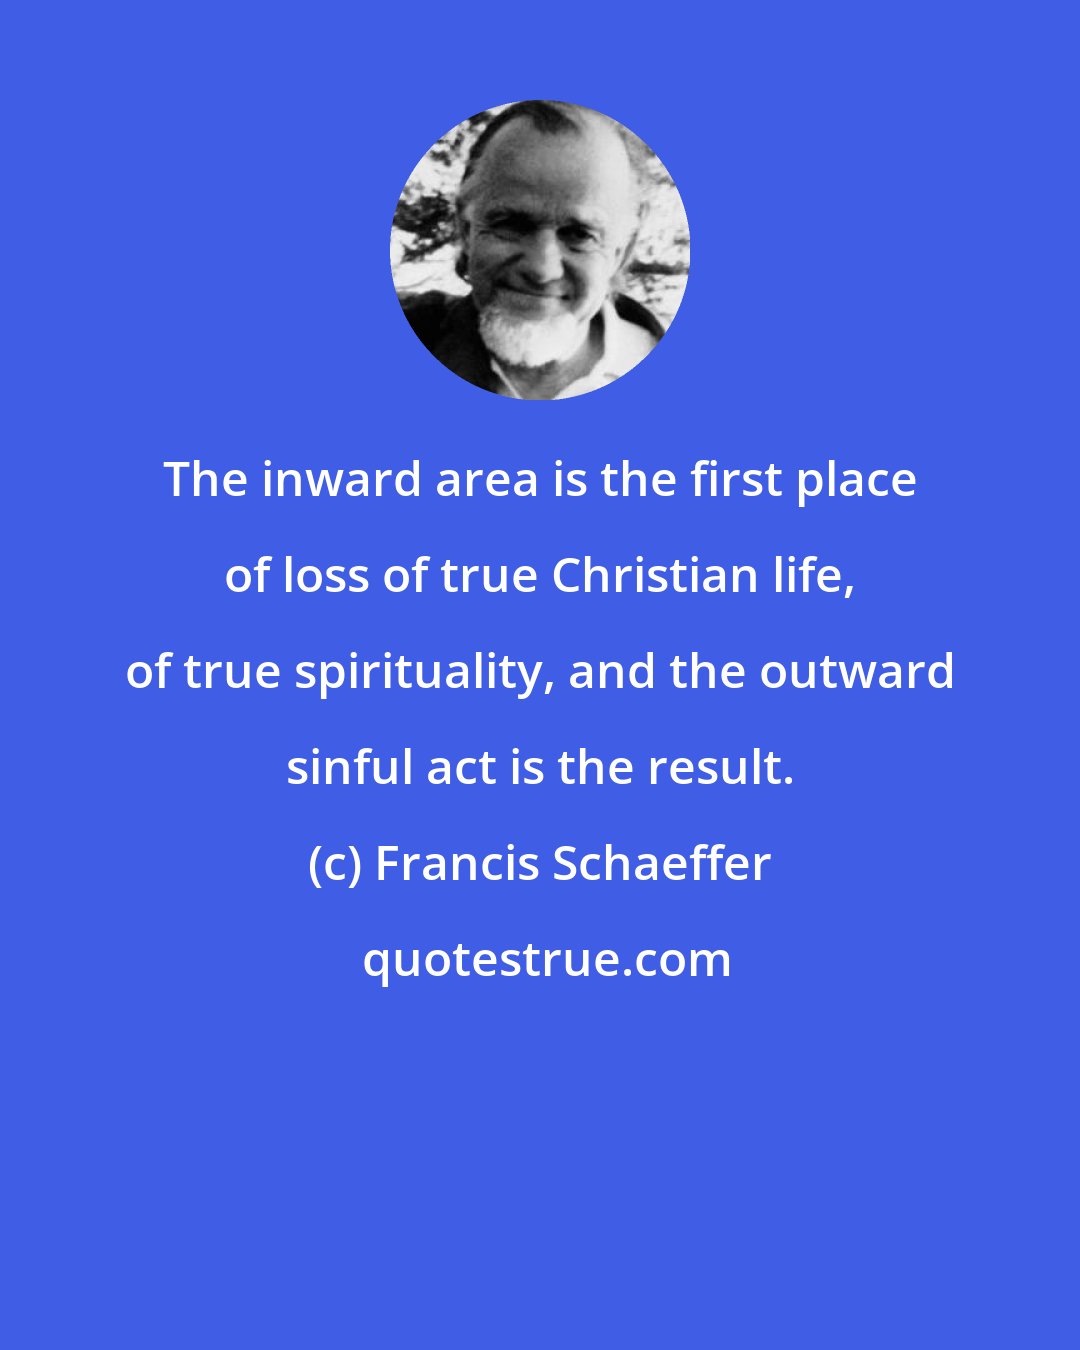 Francis Schaeffer: The inward area is the first place of loss of true Christian life, of true spirituality, and the outward sinful act is the result.